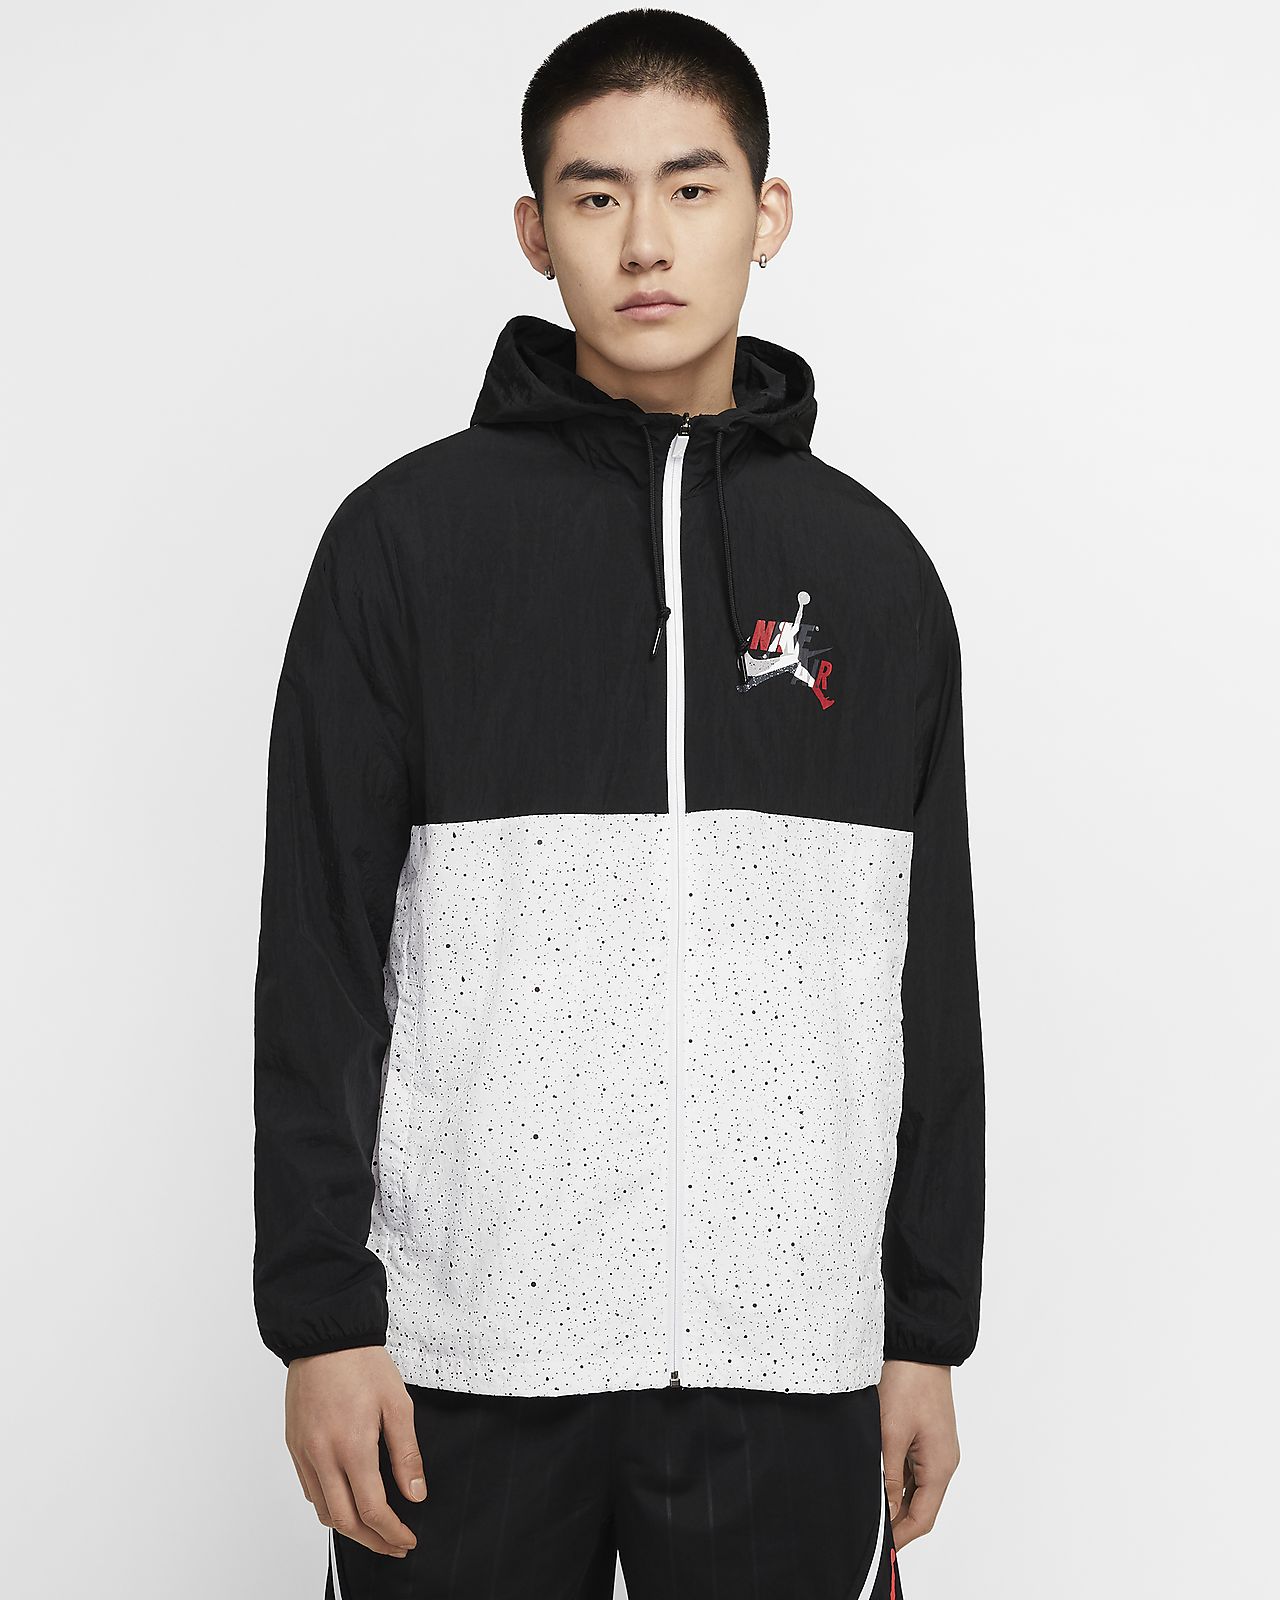 nike windshirt pullover